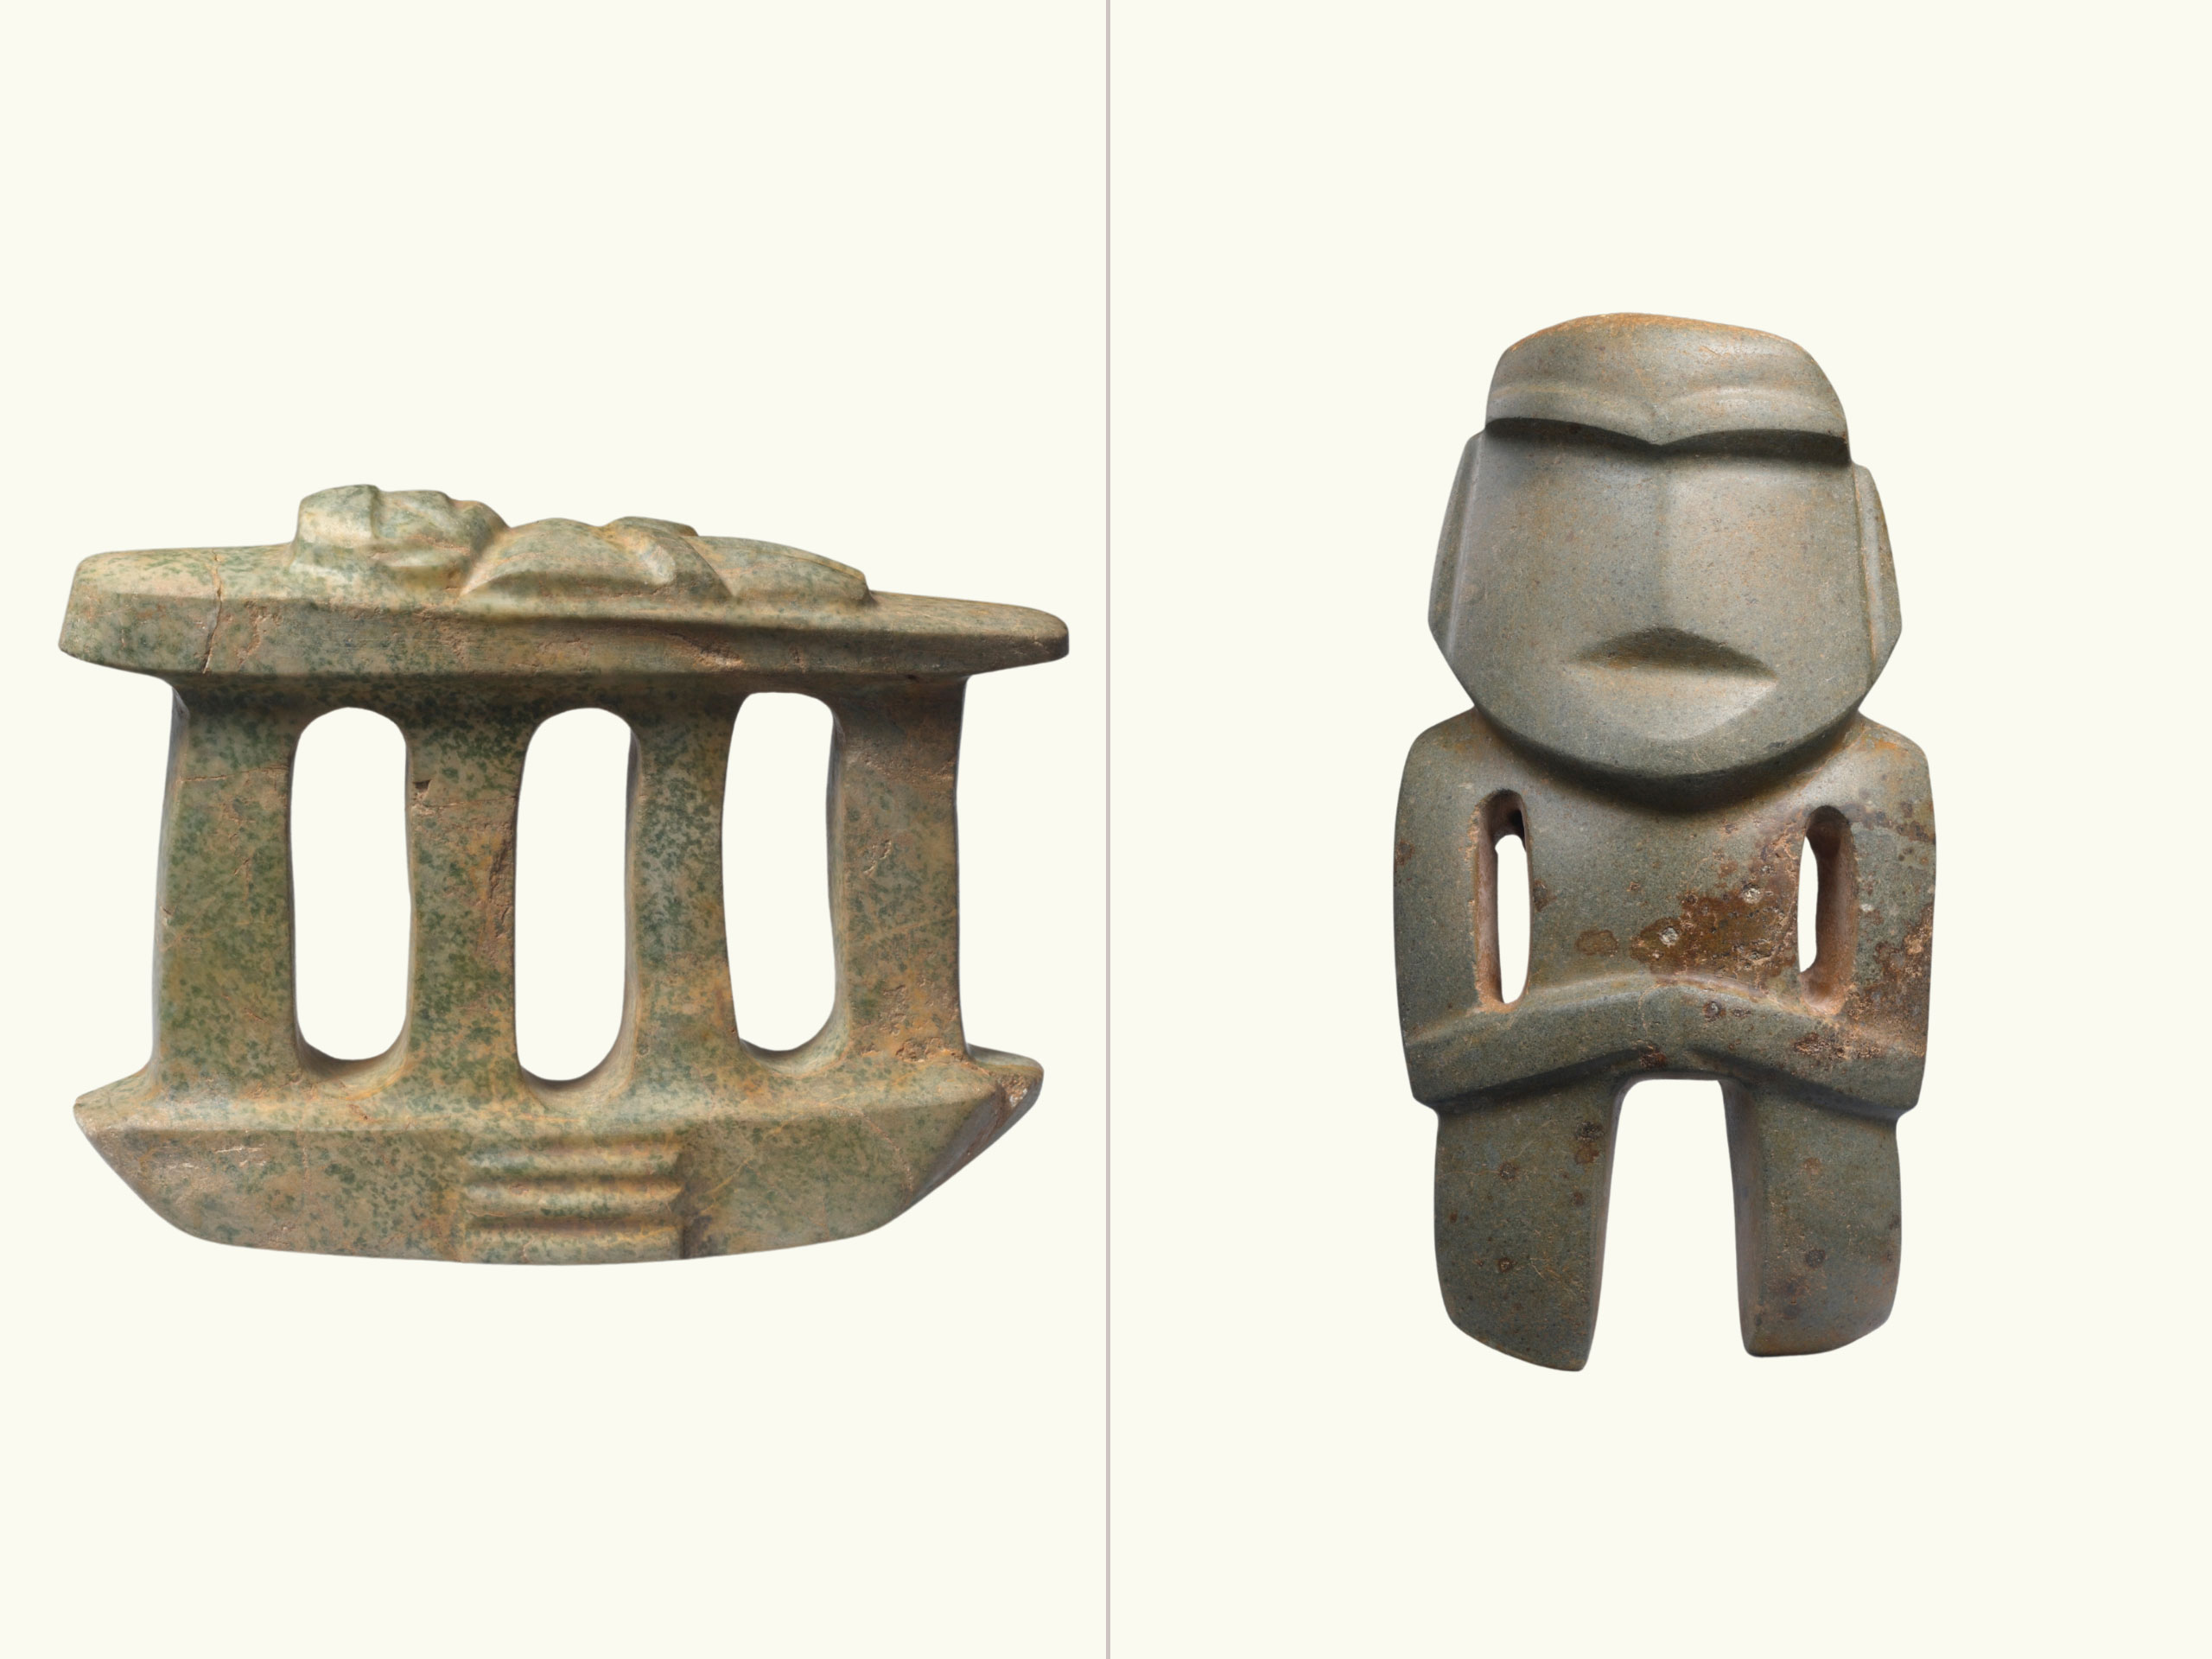 A comparison of two objects: a green stone 4 column temple with figure on the roof, and a stone figure with pronounced eyebrows and limbs.